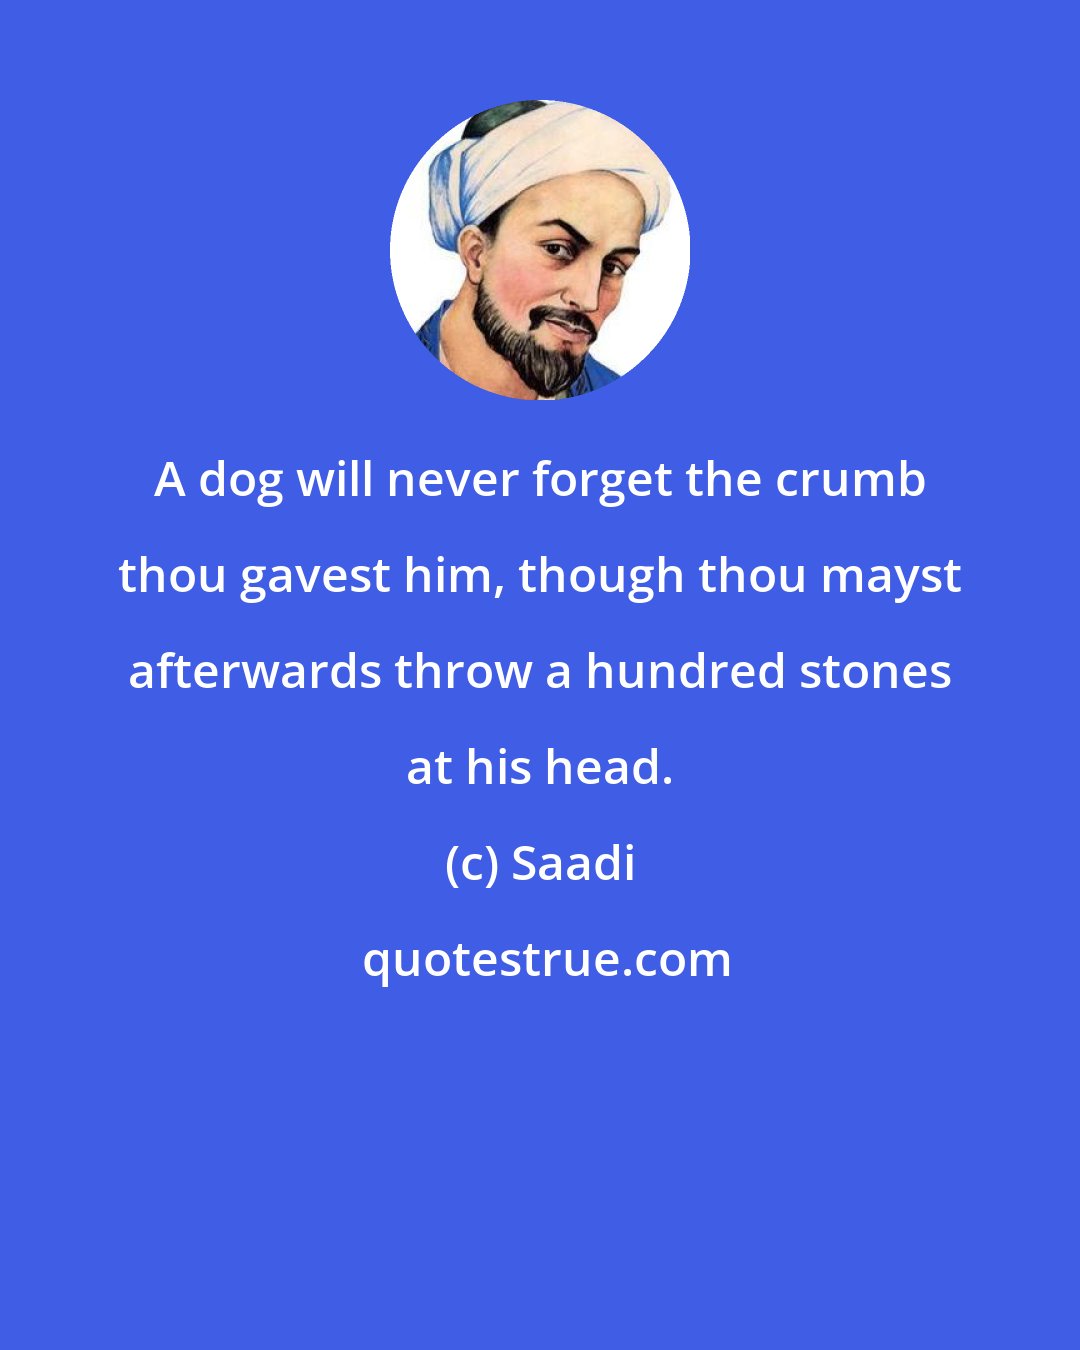 Saadi: A dog will never forget the crumb thou gavest him, though thou mayst afterwards throw a hundred stones at his head.